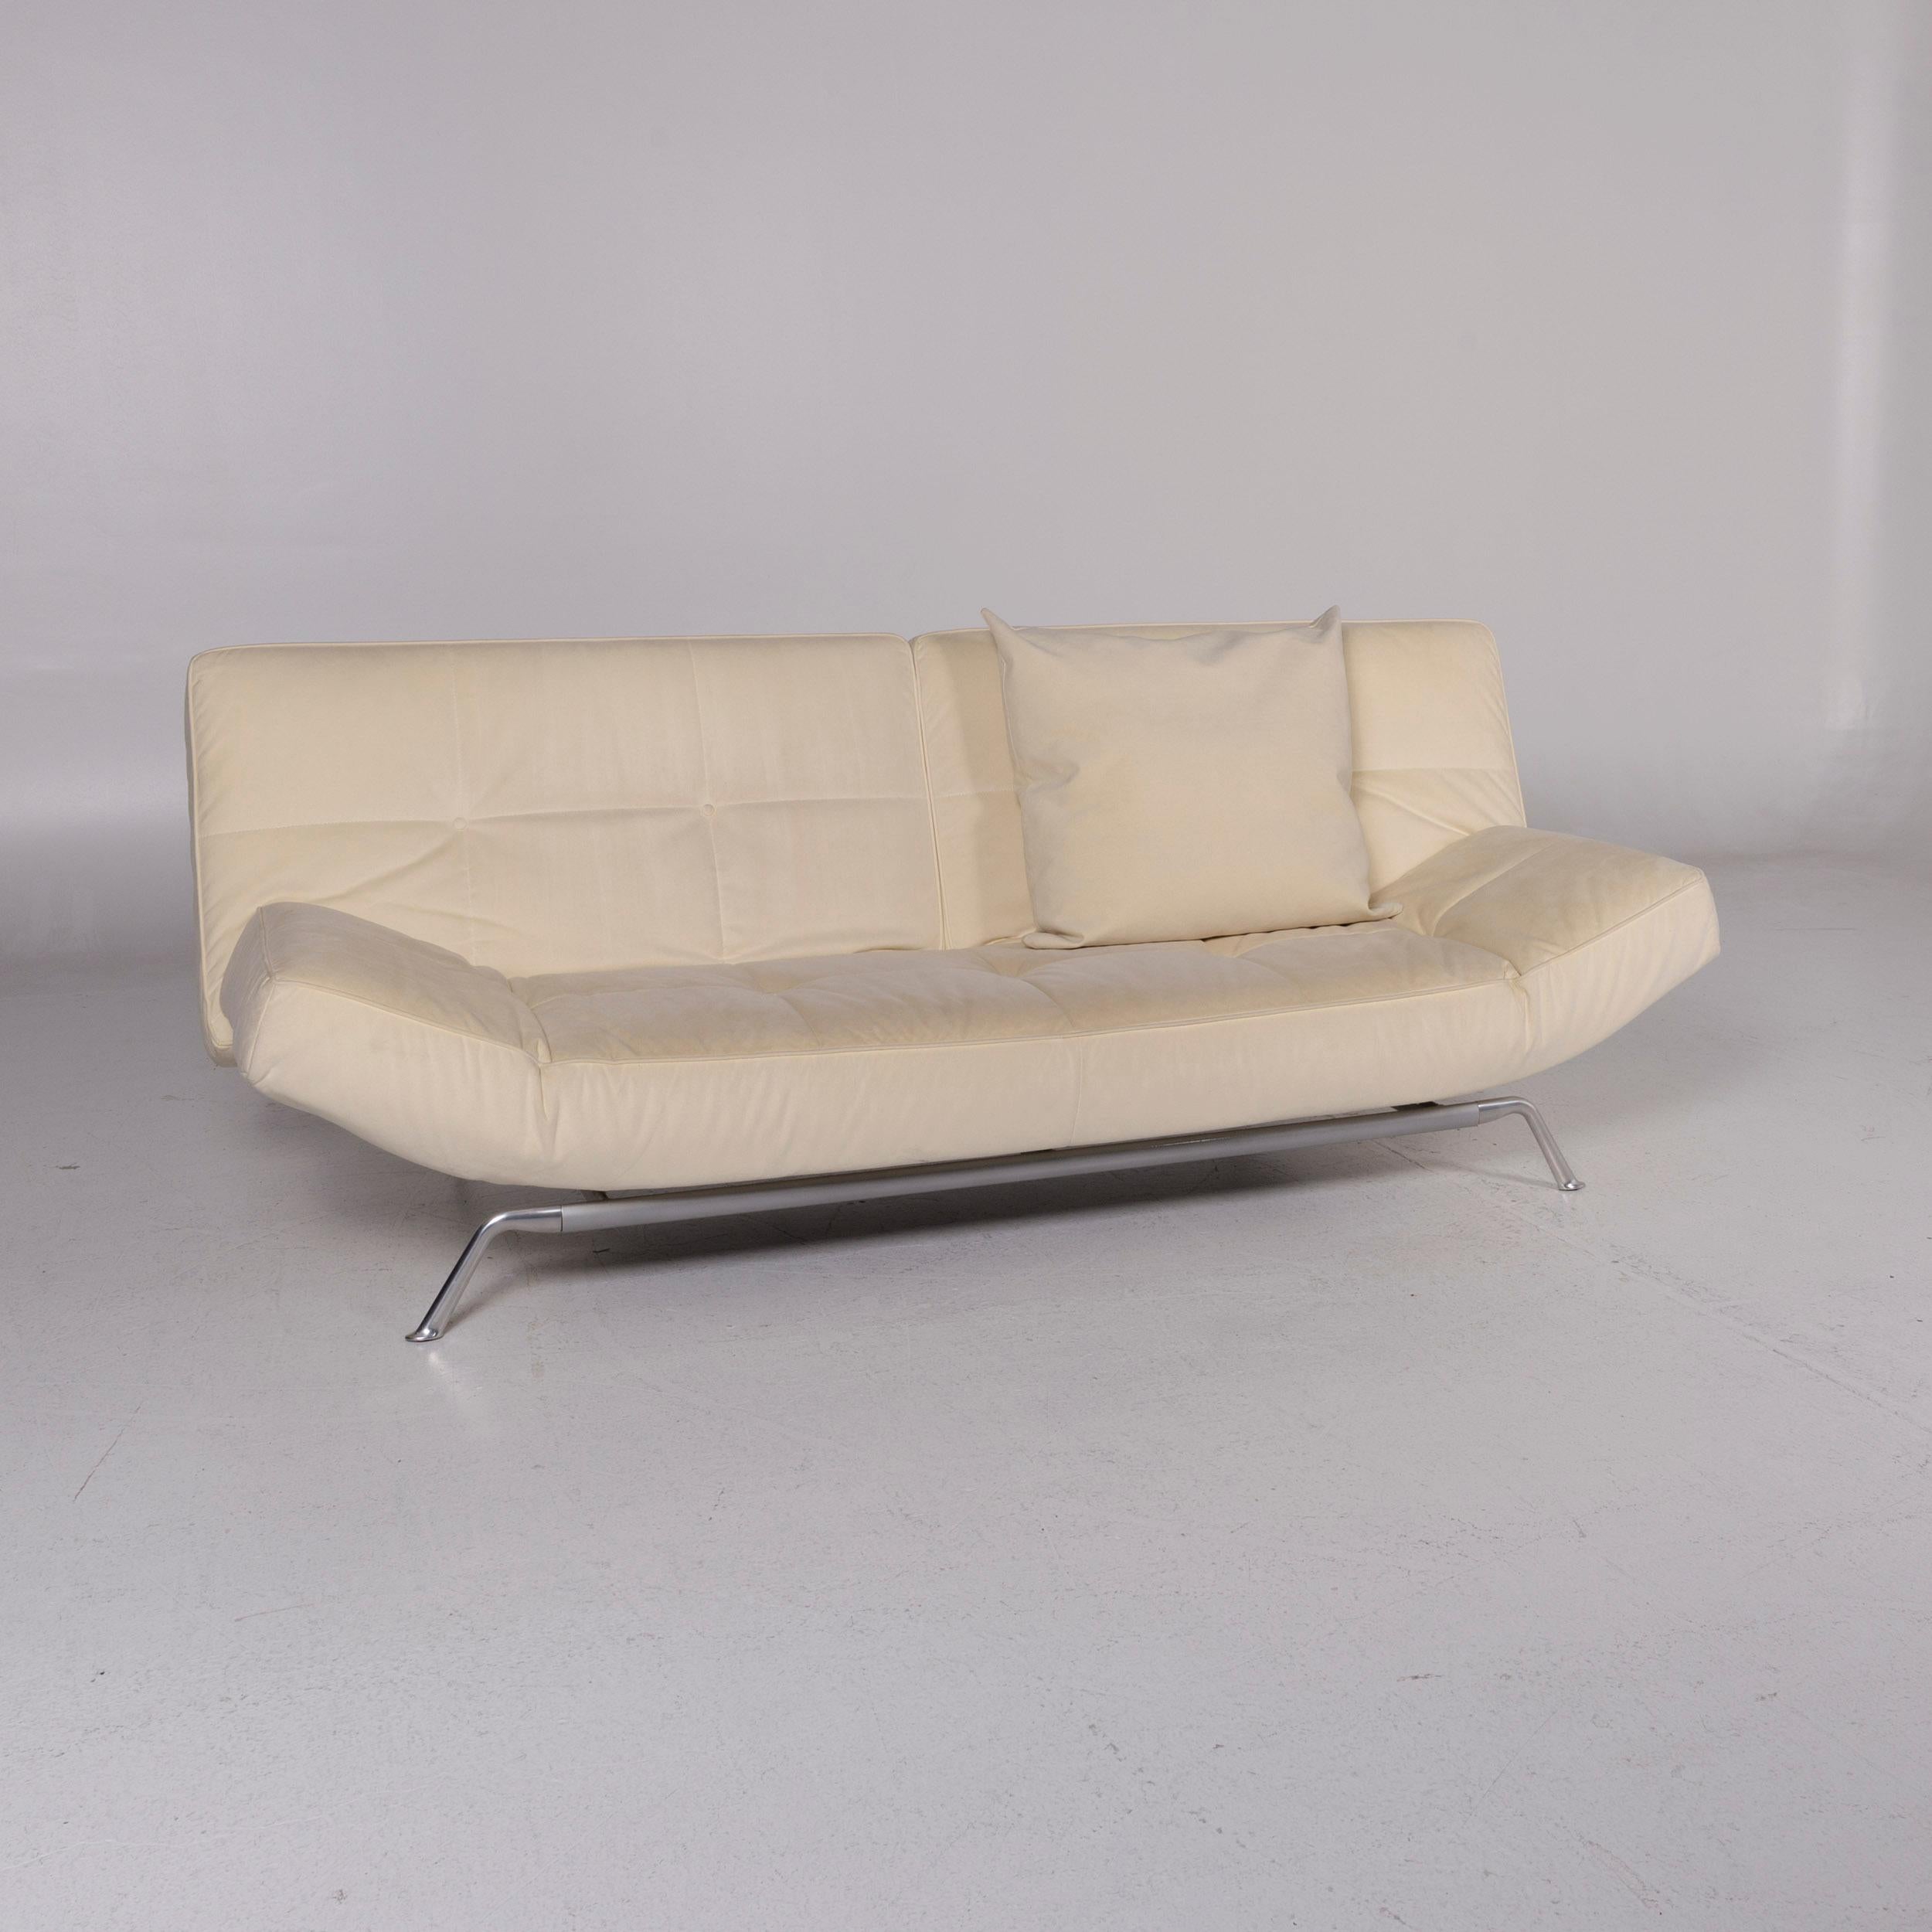 We bring to you a Ligne Roset smala fabric sofa bed cream three-seat sleep function.

 
 Product measurements in centimeters:
 
Depth 118
Width 232
Height 92
Seat-height 41
Rest-height 42
Seat-depth 62
Seat-width 232
Back-height 49.